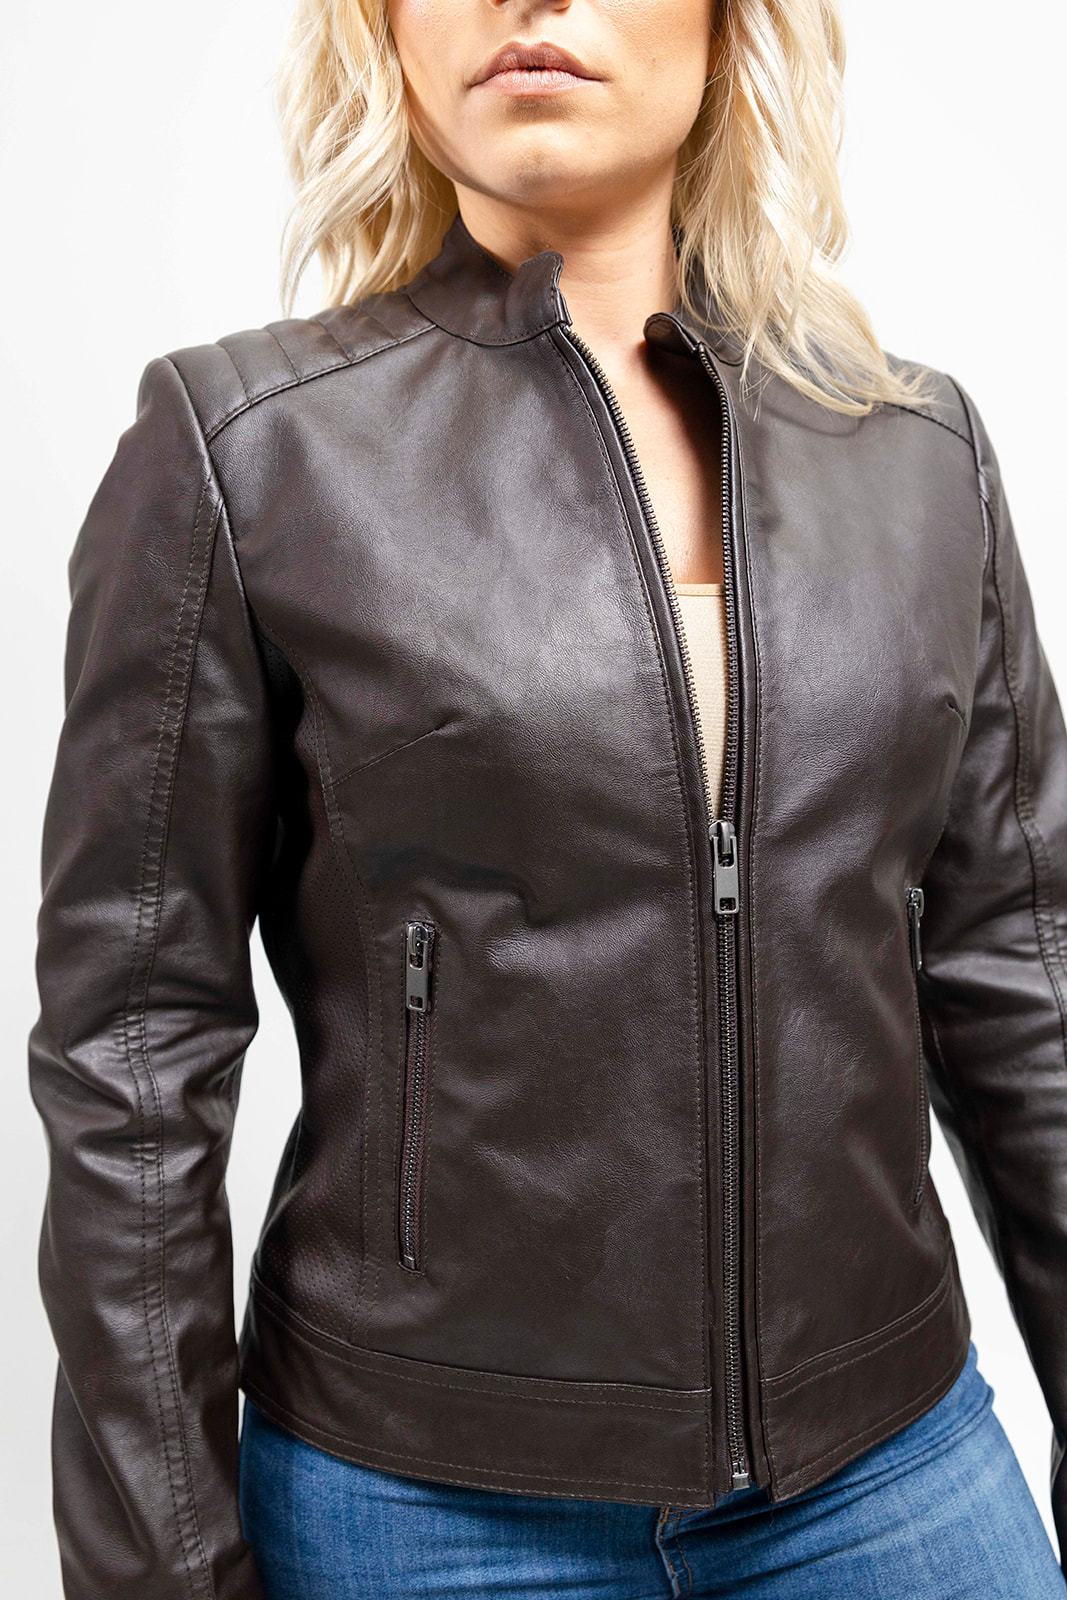 A woman wearing the First Manufacturing Beverly - Women's Vegan Leather Jacket, Brown.